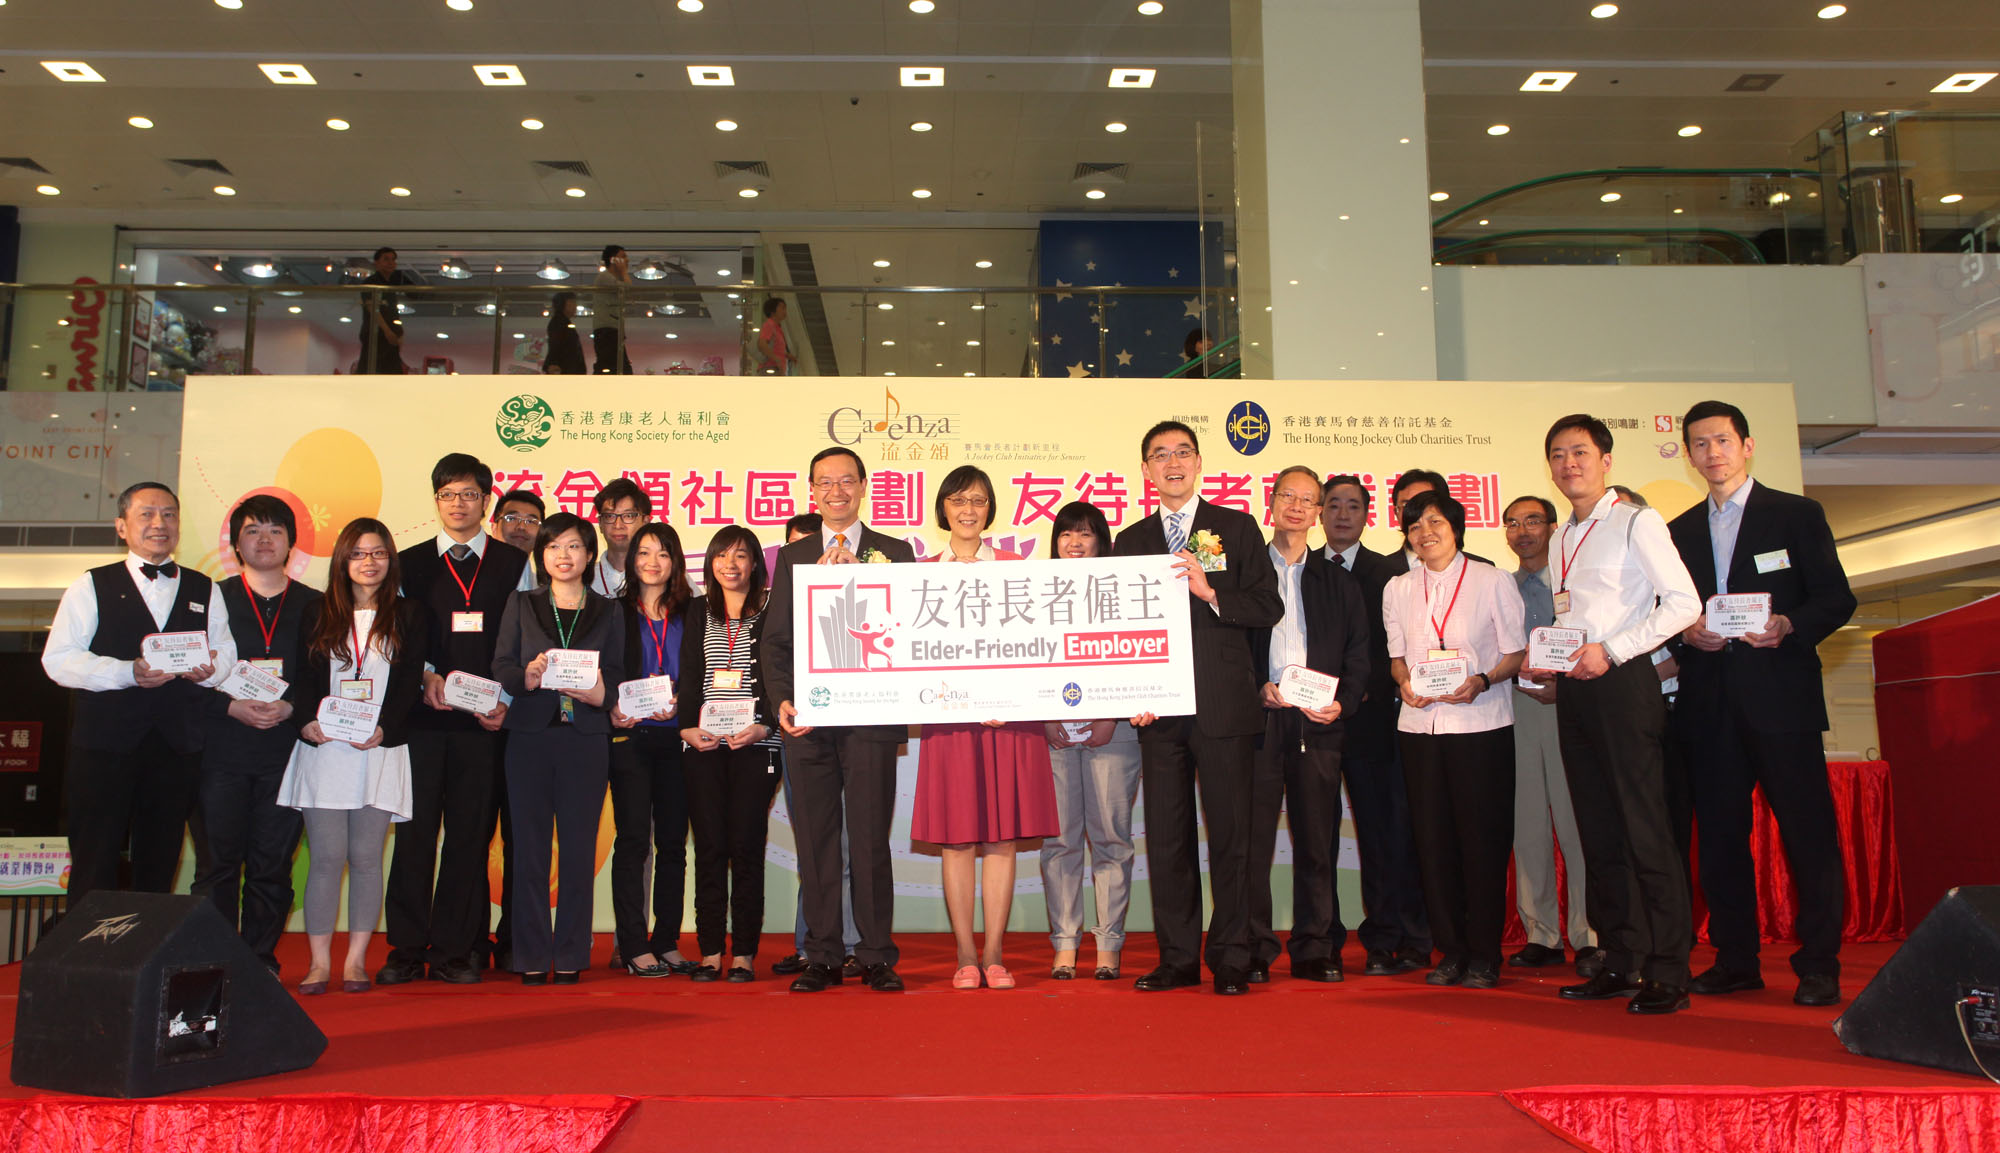 The Club's Executive Director, Charities, Douglas So (1st row, 5th from right) says job vacancies for seniors has doubled to over 600 compared with last year. He joins SAGE Chairman Dr Kim Mak (1st row, 8th from left), CADENZA Project Director Professor Jean Woo (1st row, 9th from left) and representatives from participating organisations for a photo.
